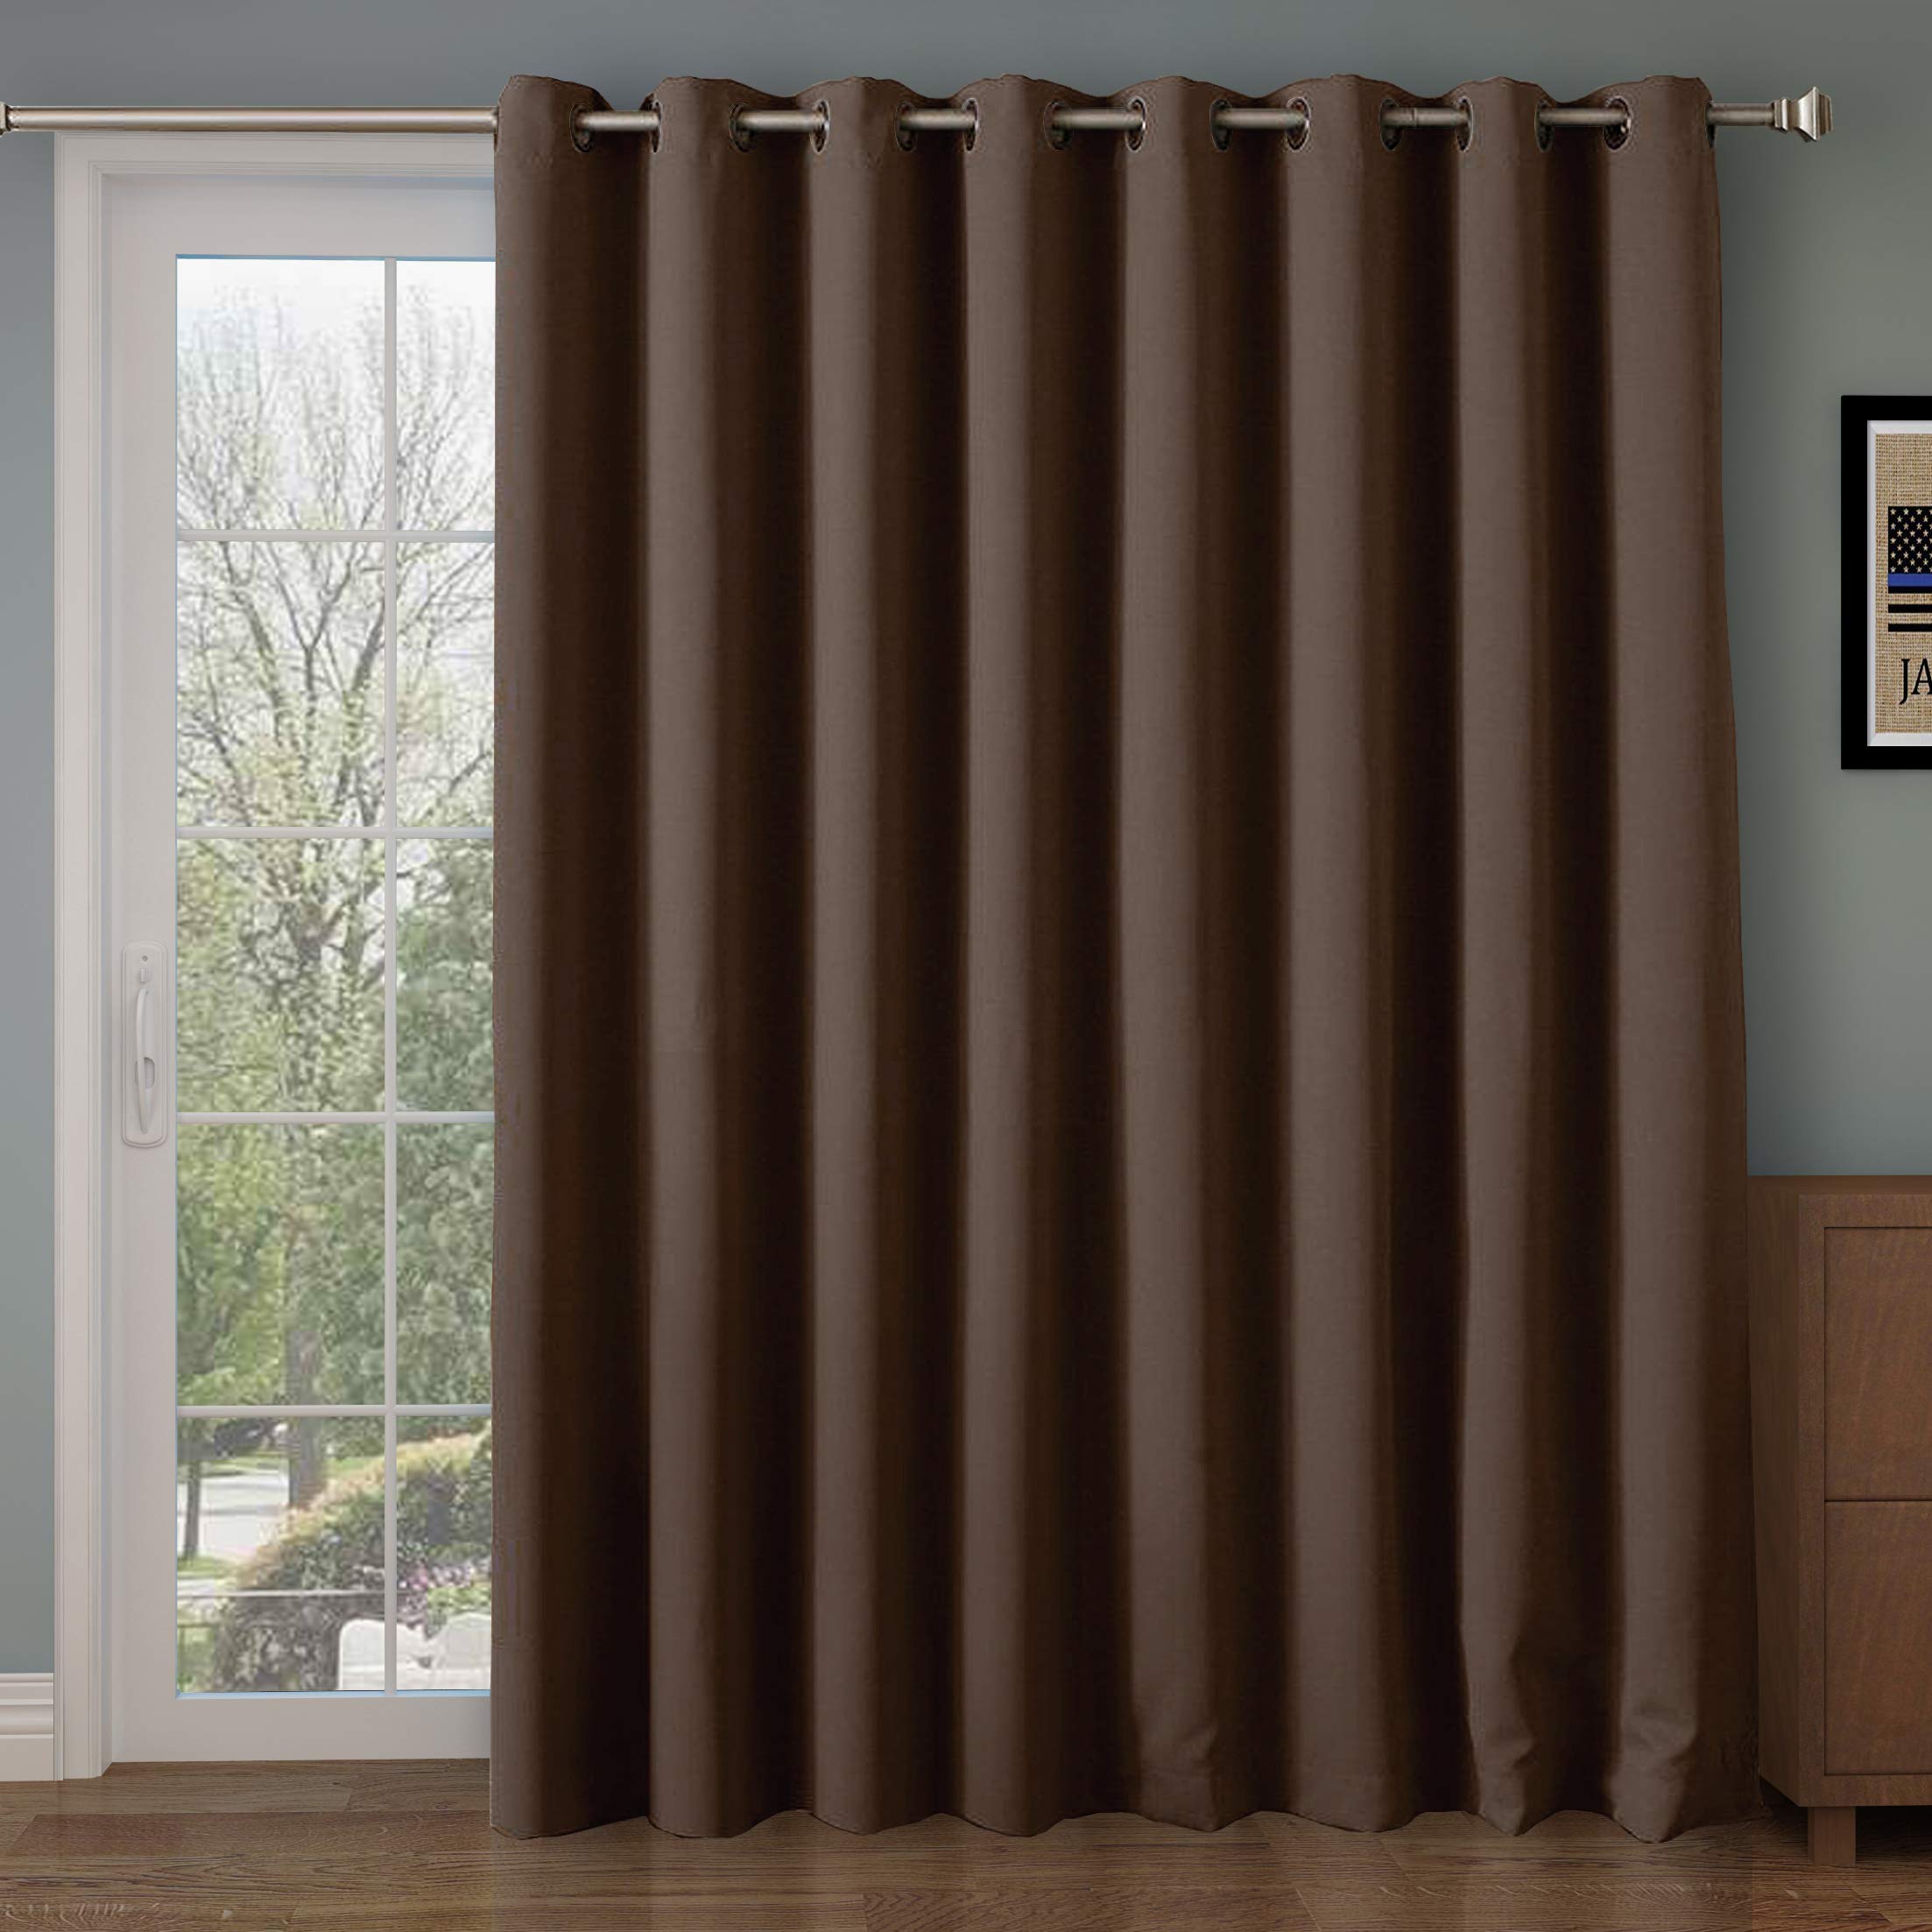 Book Cover Rose Home Fashion RHF Blackout Thermal Insulated Curtain - Antique Bronze Grommet Top for Bedroom (Chocolate, W100 x L84) Chocolate W100xL84